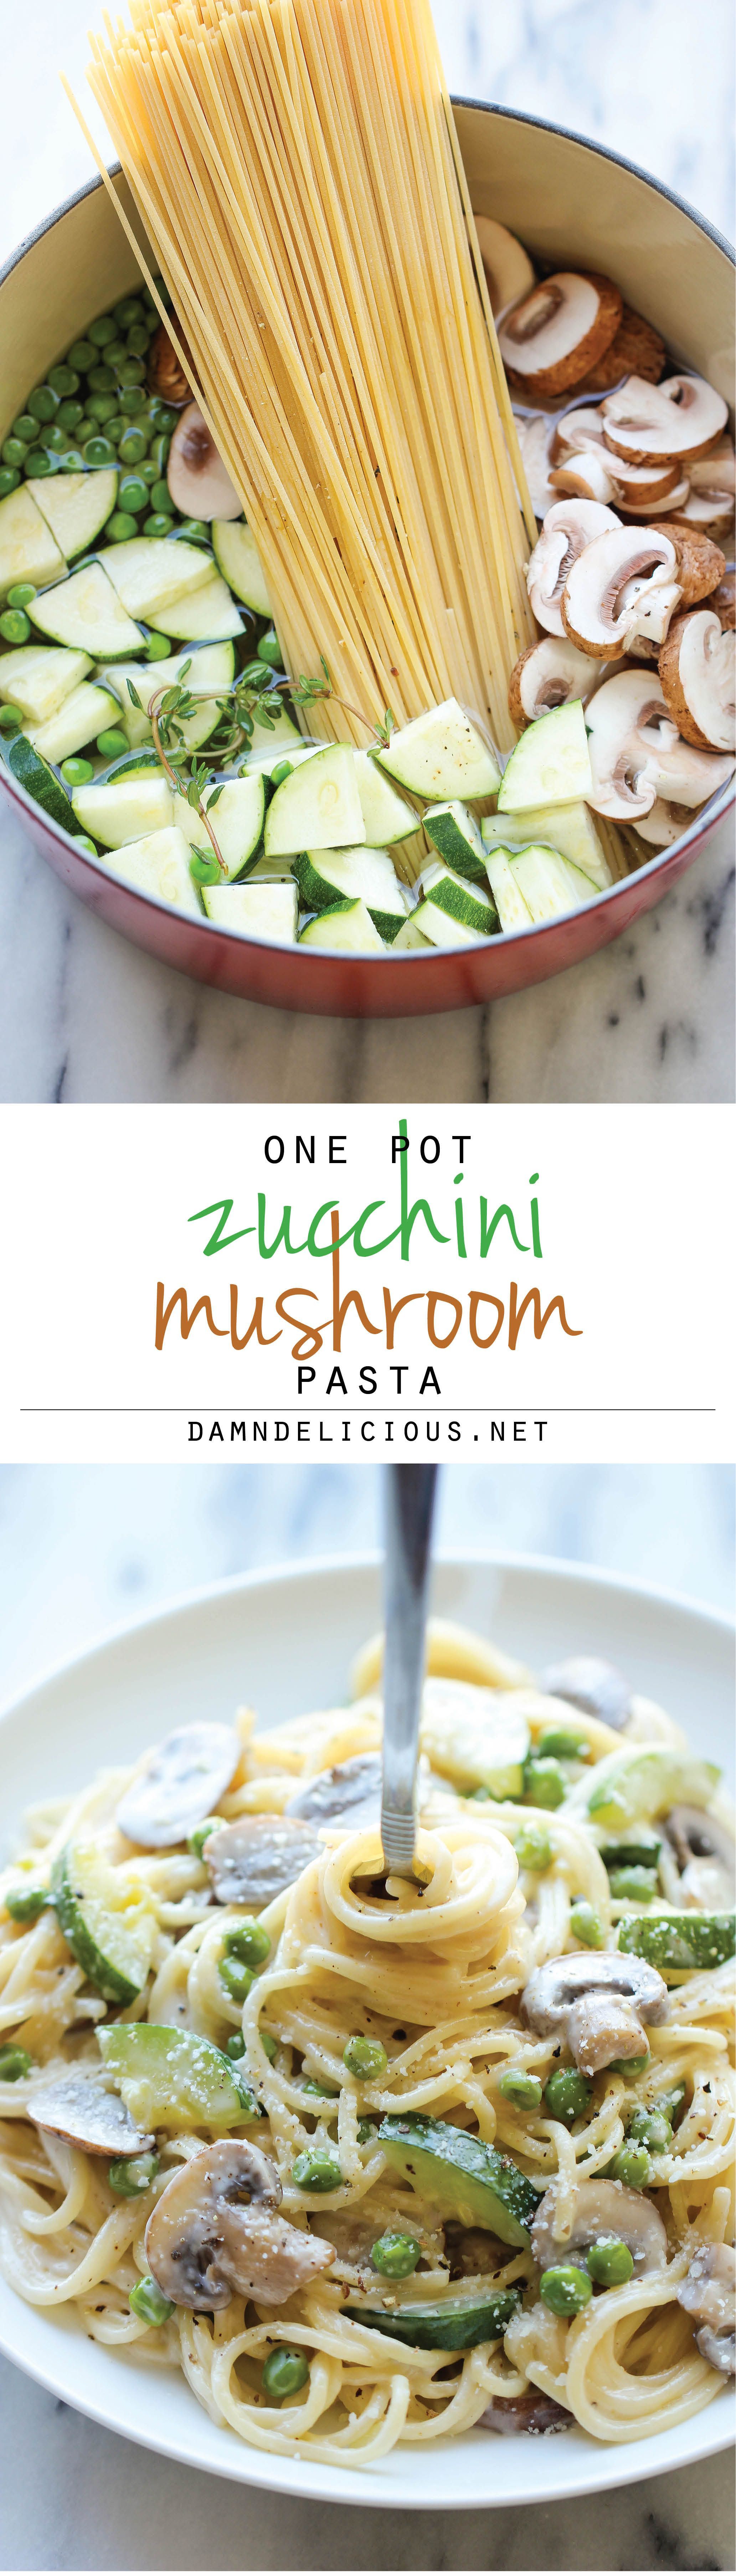 One Pot Zucchini Mushroom Pasta – A creamy, hearty pasta dish that you can make in just 20 min. Even the pasta gets cooked in the